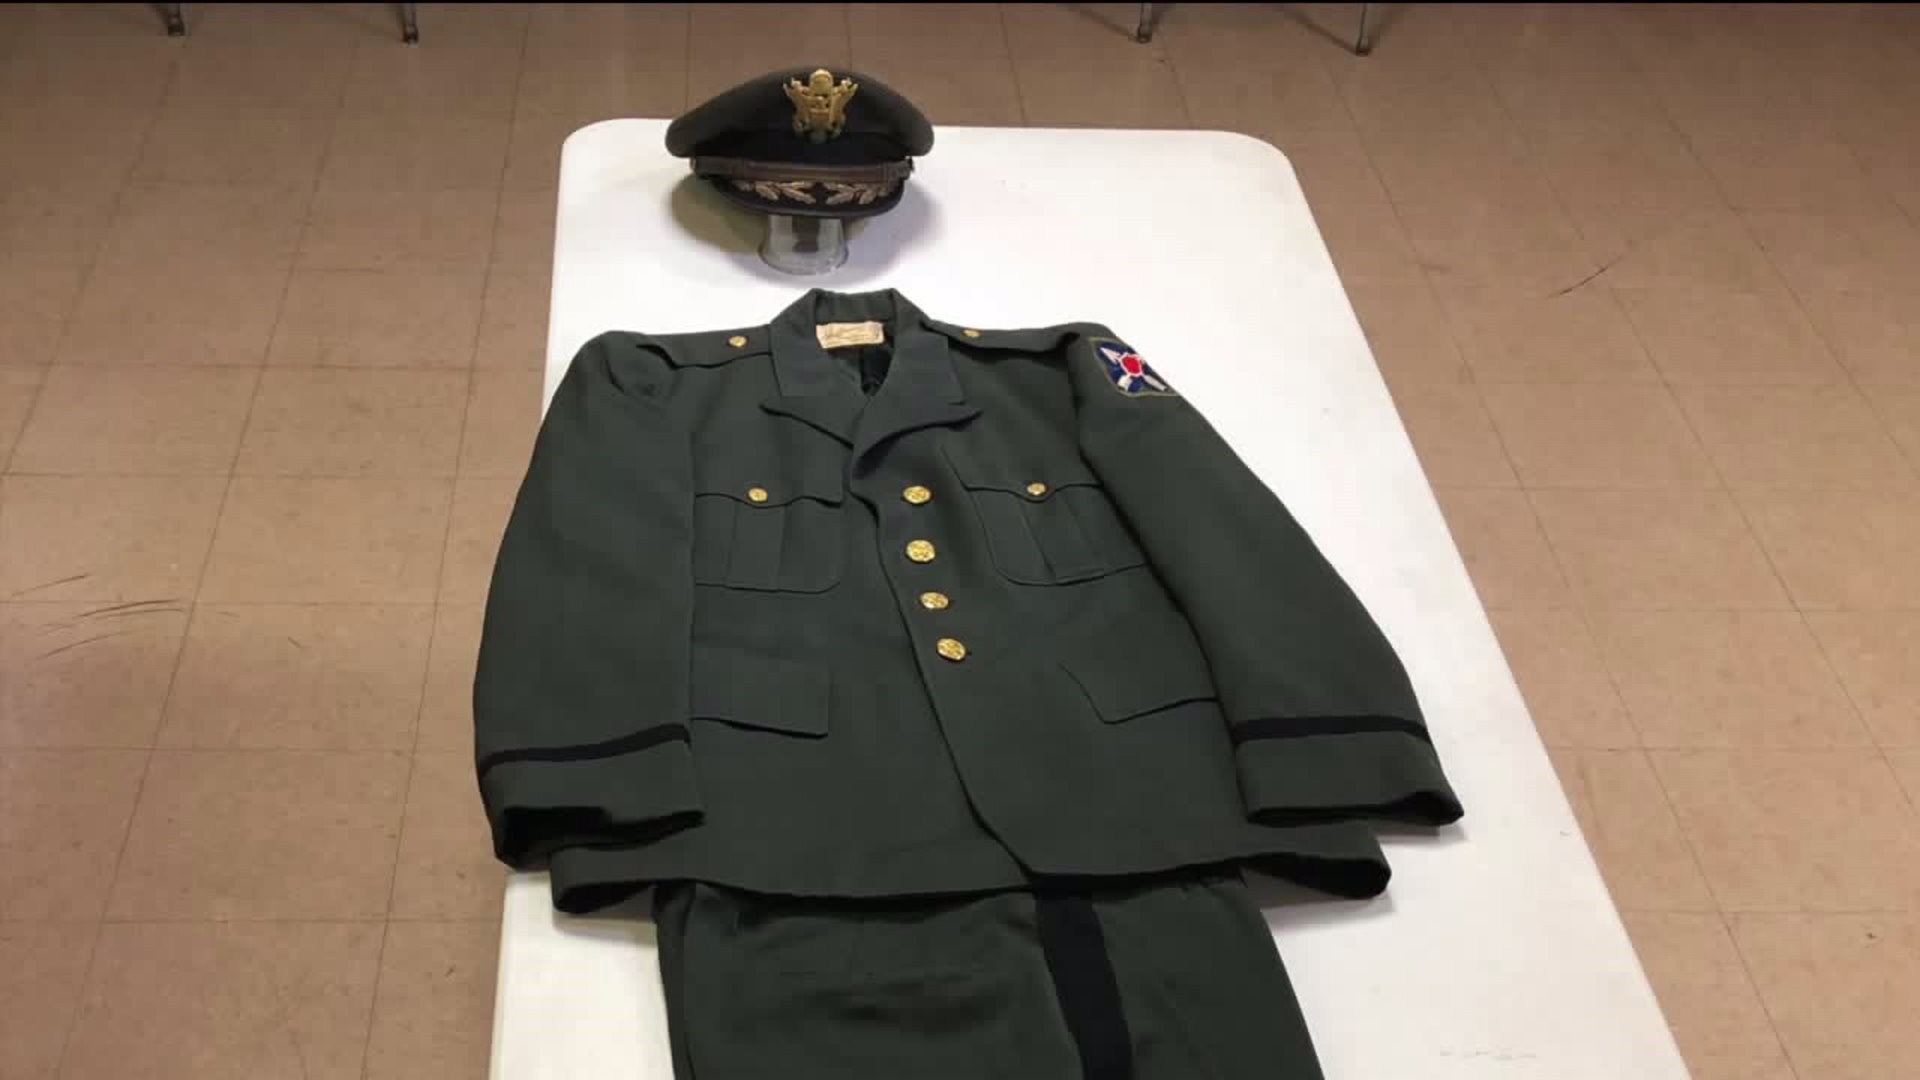 World War II Military Uniform is Back Home in Our Area